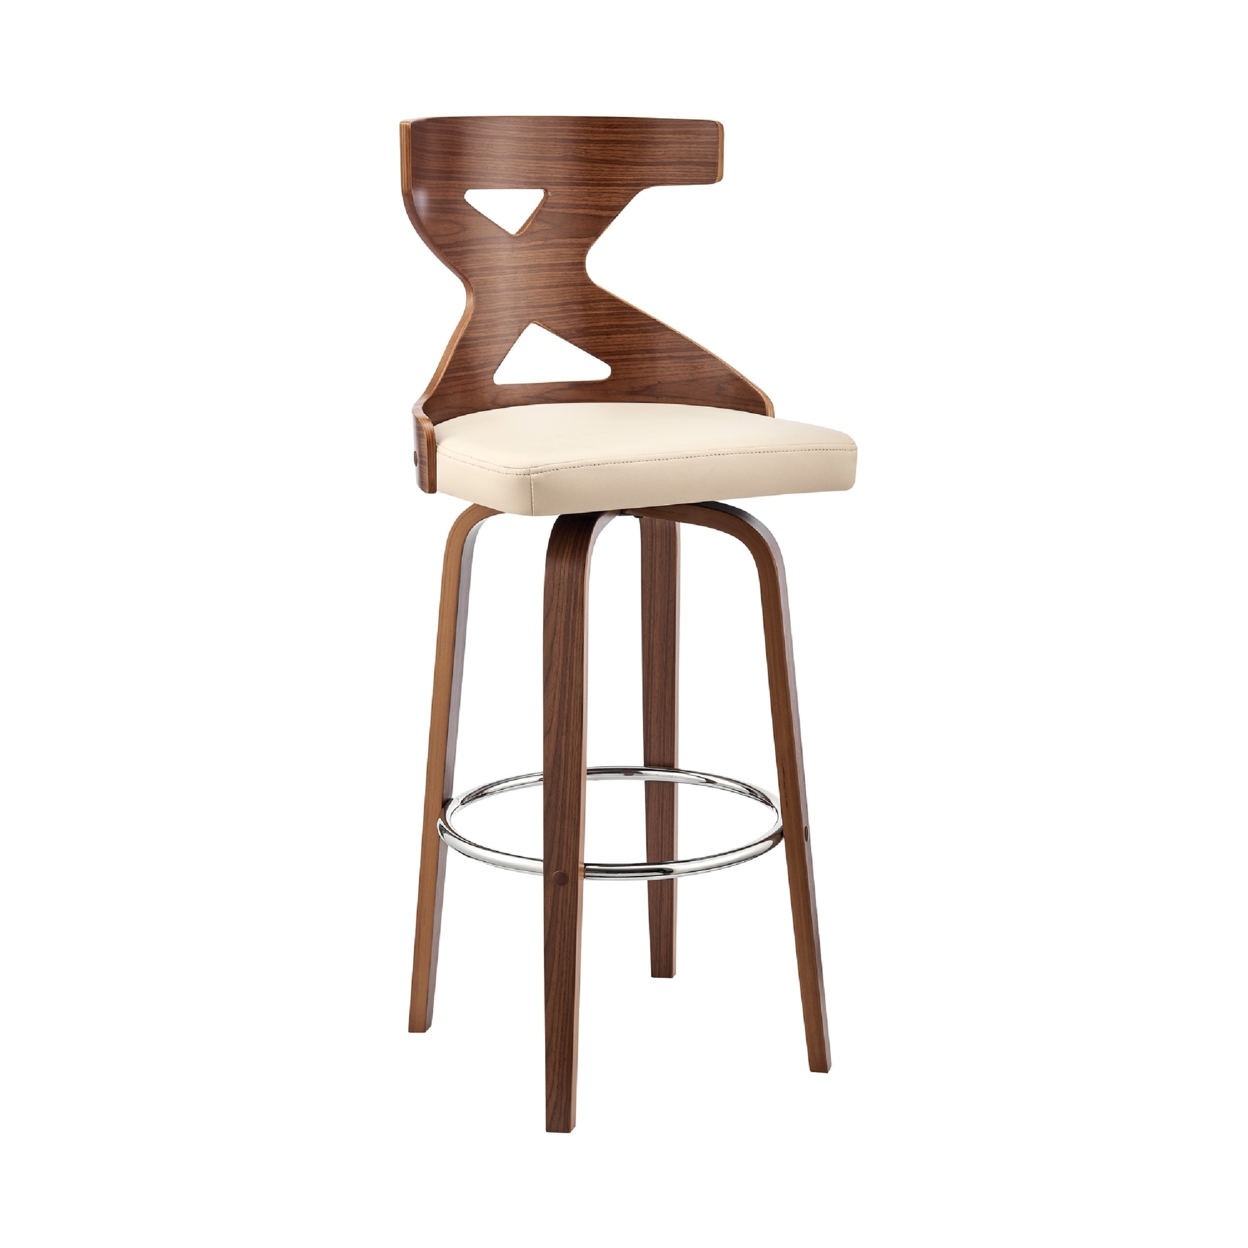 Swivel Barstool With Curved Wooden X Back, Cream And Brown- Saltoro Sherpi